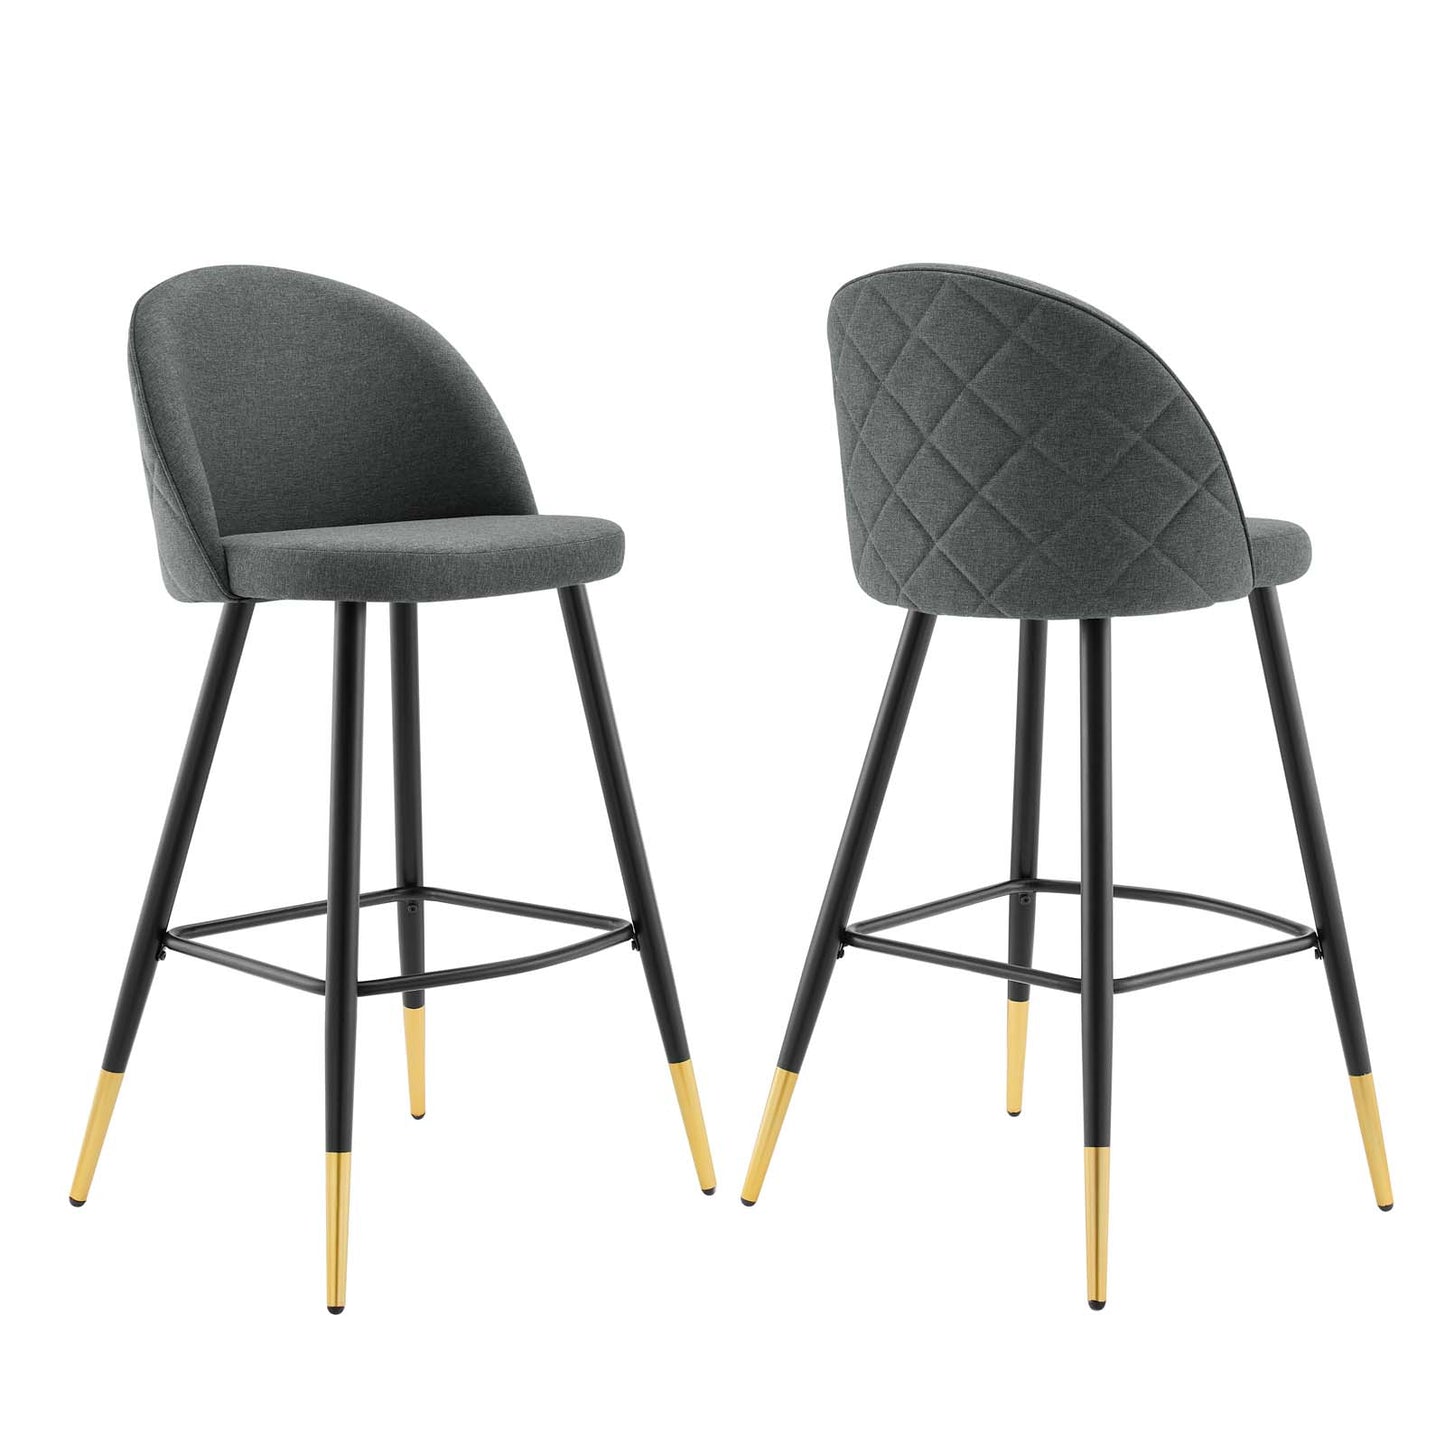 Cordial Fabric Bar Stools - Set of 2 Gray EEI-4526-GRY